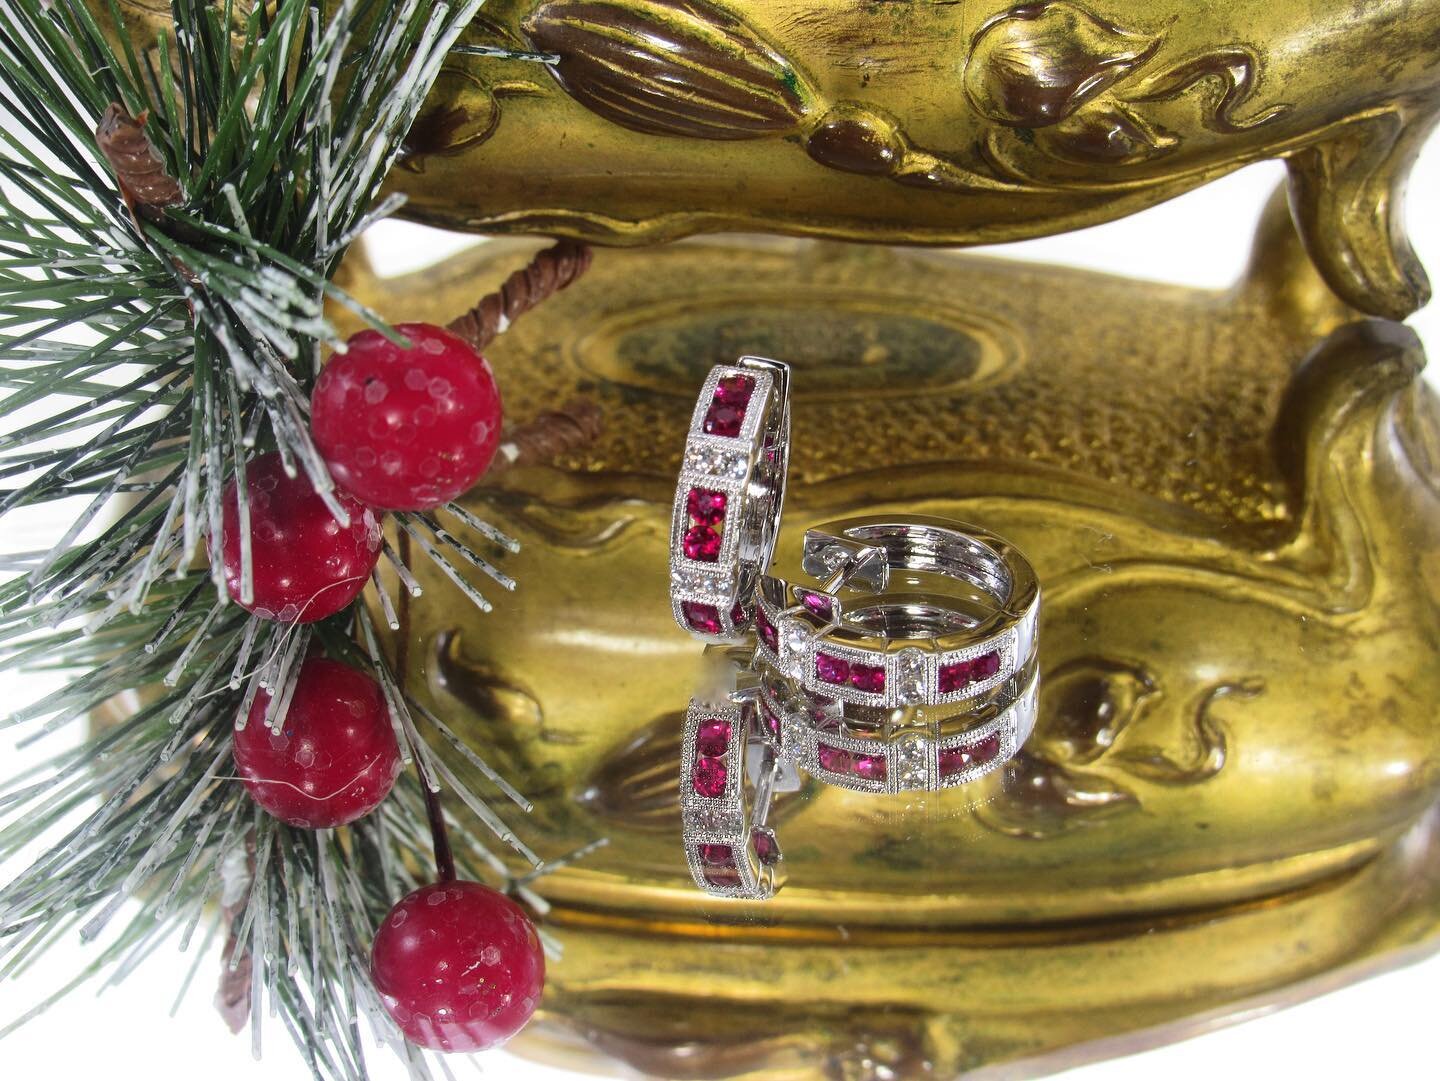 Lovely ruby and diamond hoops make the prettiest gift for under your tree ! #thejewelersbenchhershey #hershey #hoops #ruby #rubyred #rubyearrings #jewelry #jewel #diamond #christmas #gift #giftideas #stockingstuffers